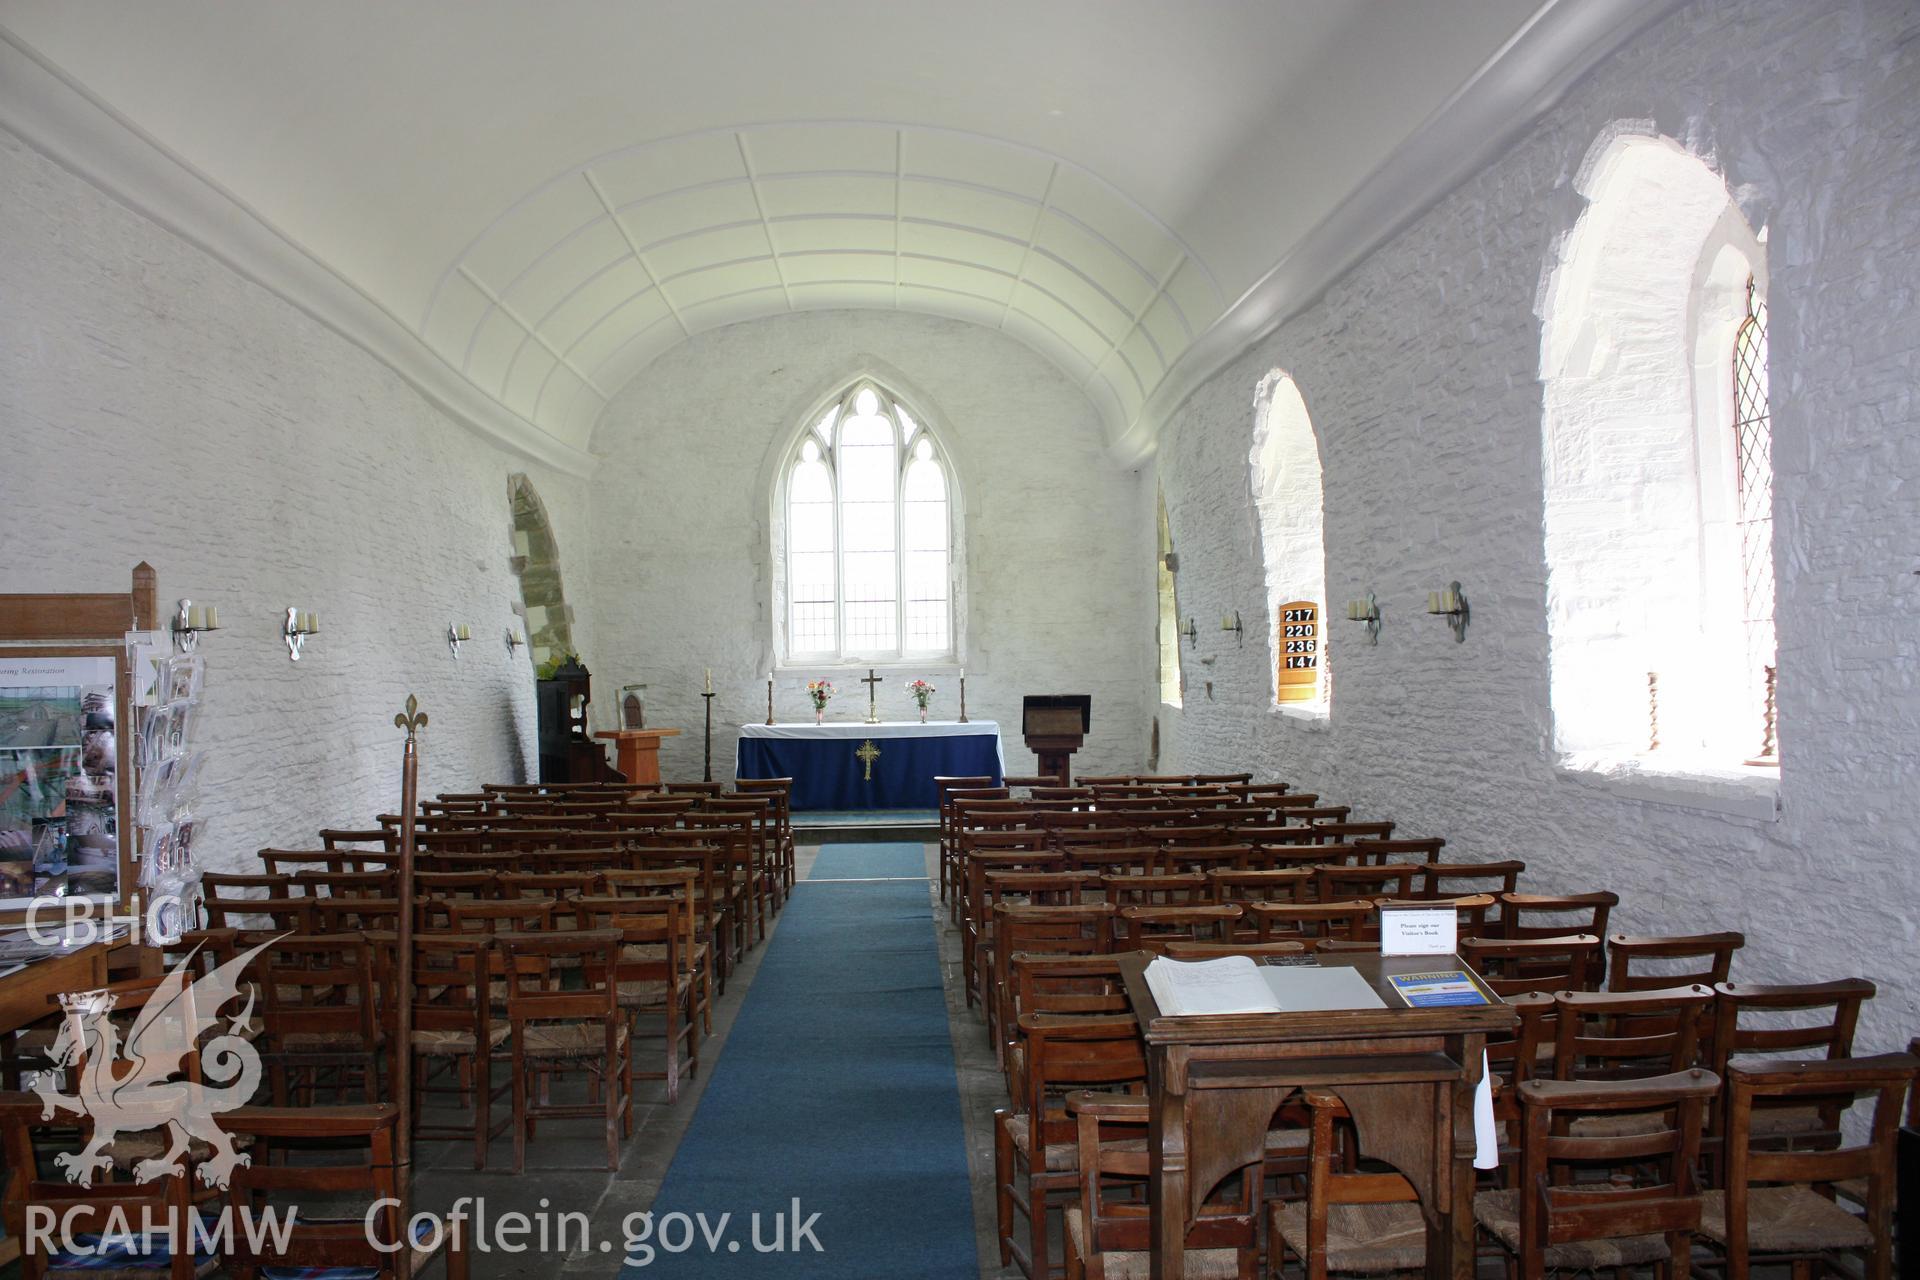 St Mary's Church, Pilleth. Interior view of the nave and chancel.